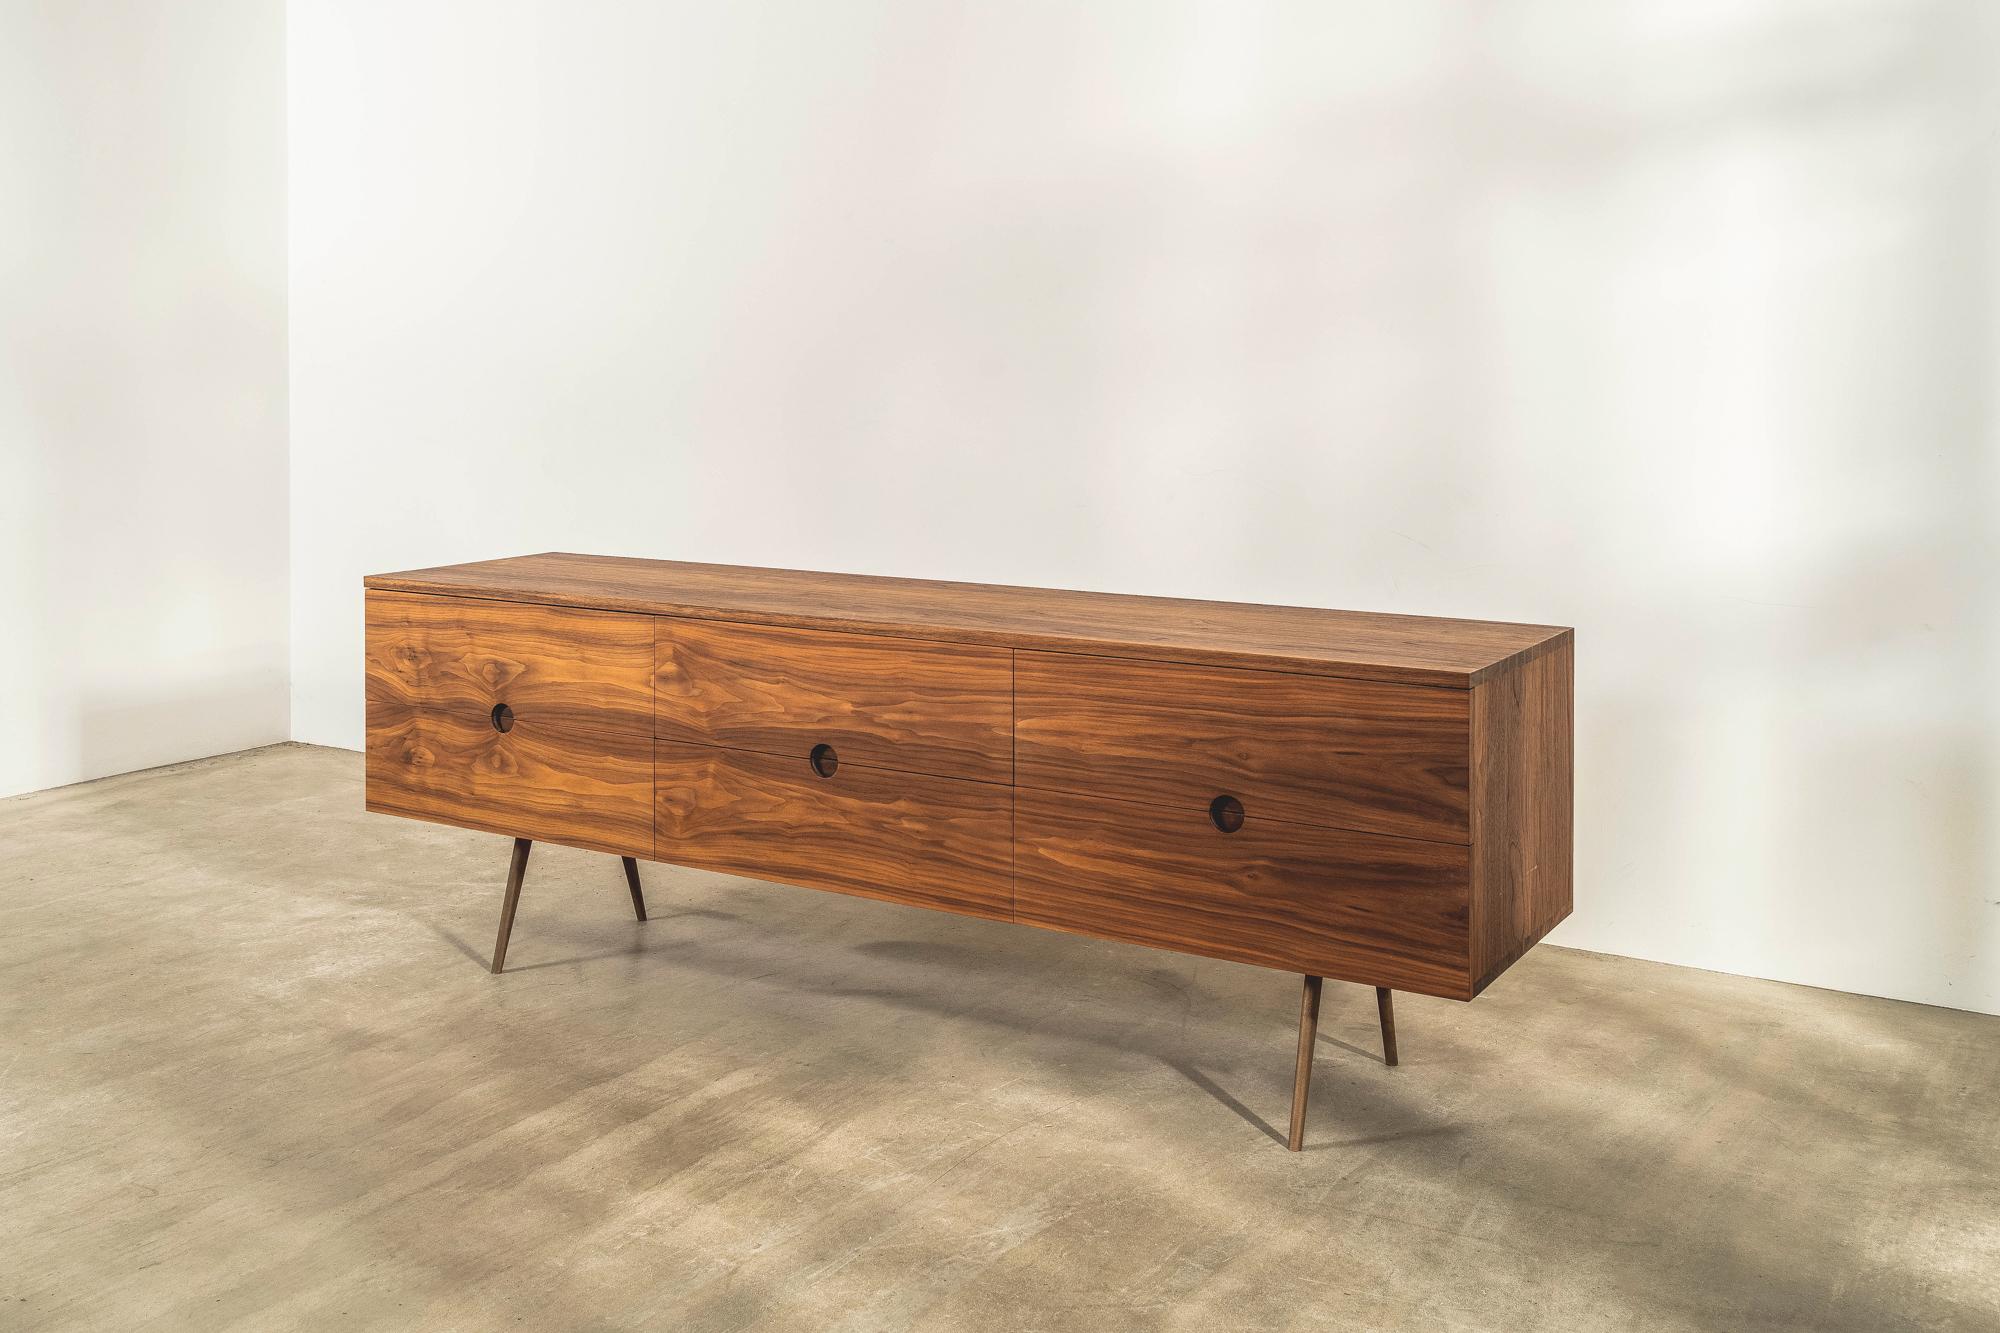 This special edition sideboard with solid brass underframe has six drawers and is made in solid walnut with an oiled finish. 

It has traditional finger jointing detail on the top and bottom edges and carefully considered detailing for the drawer